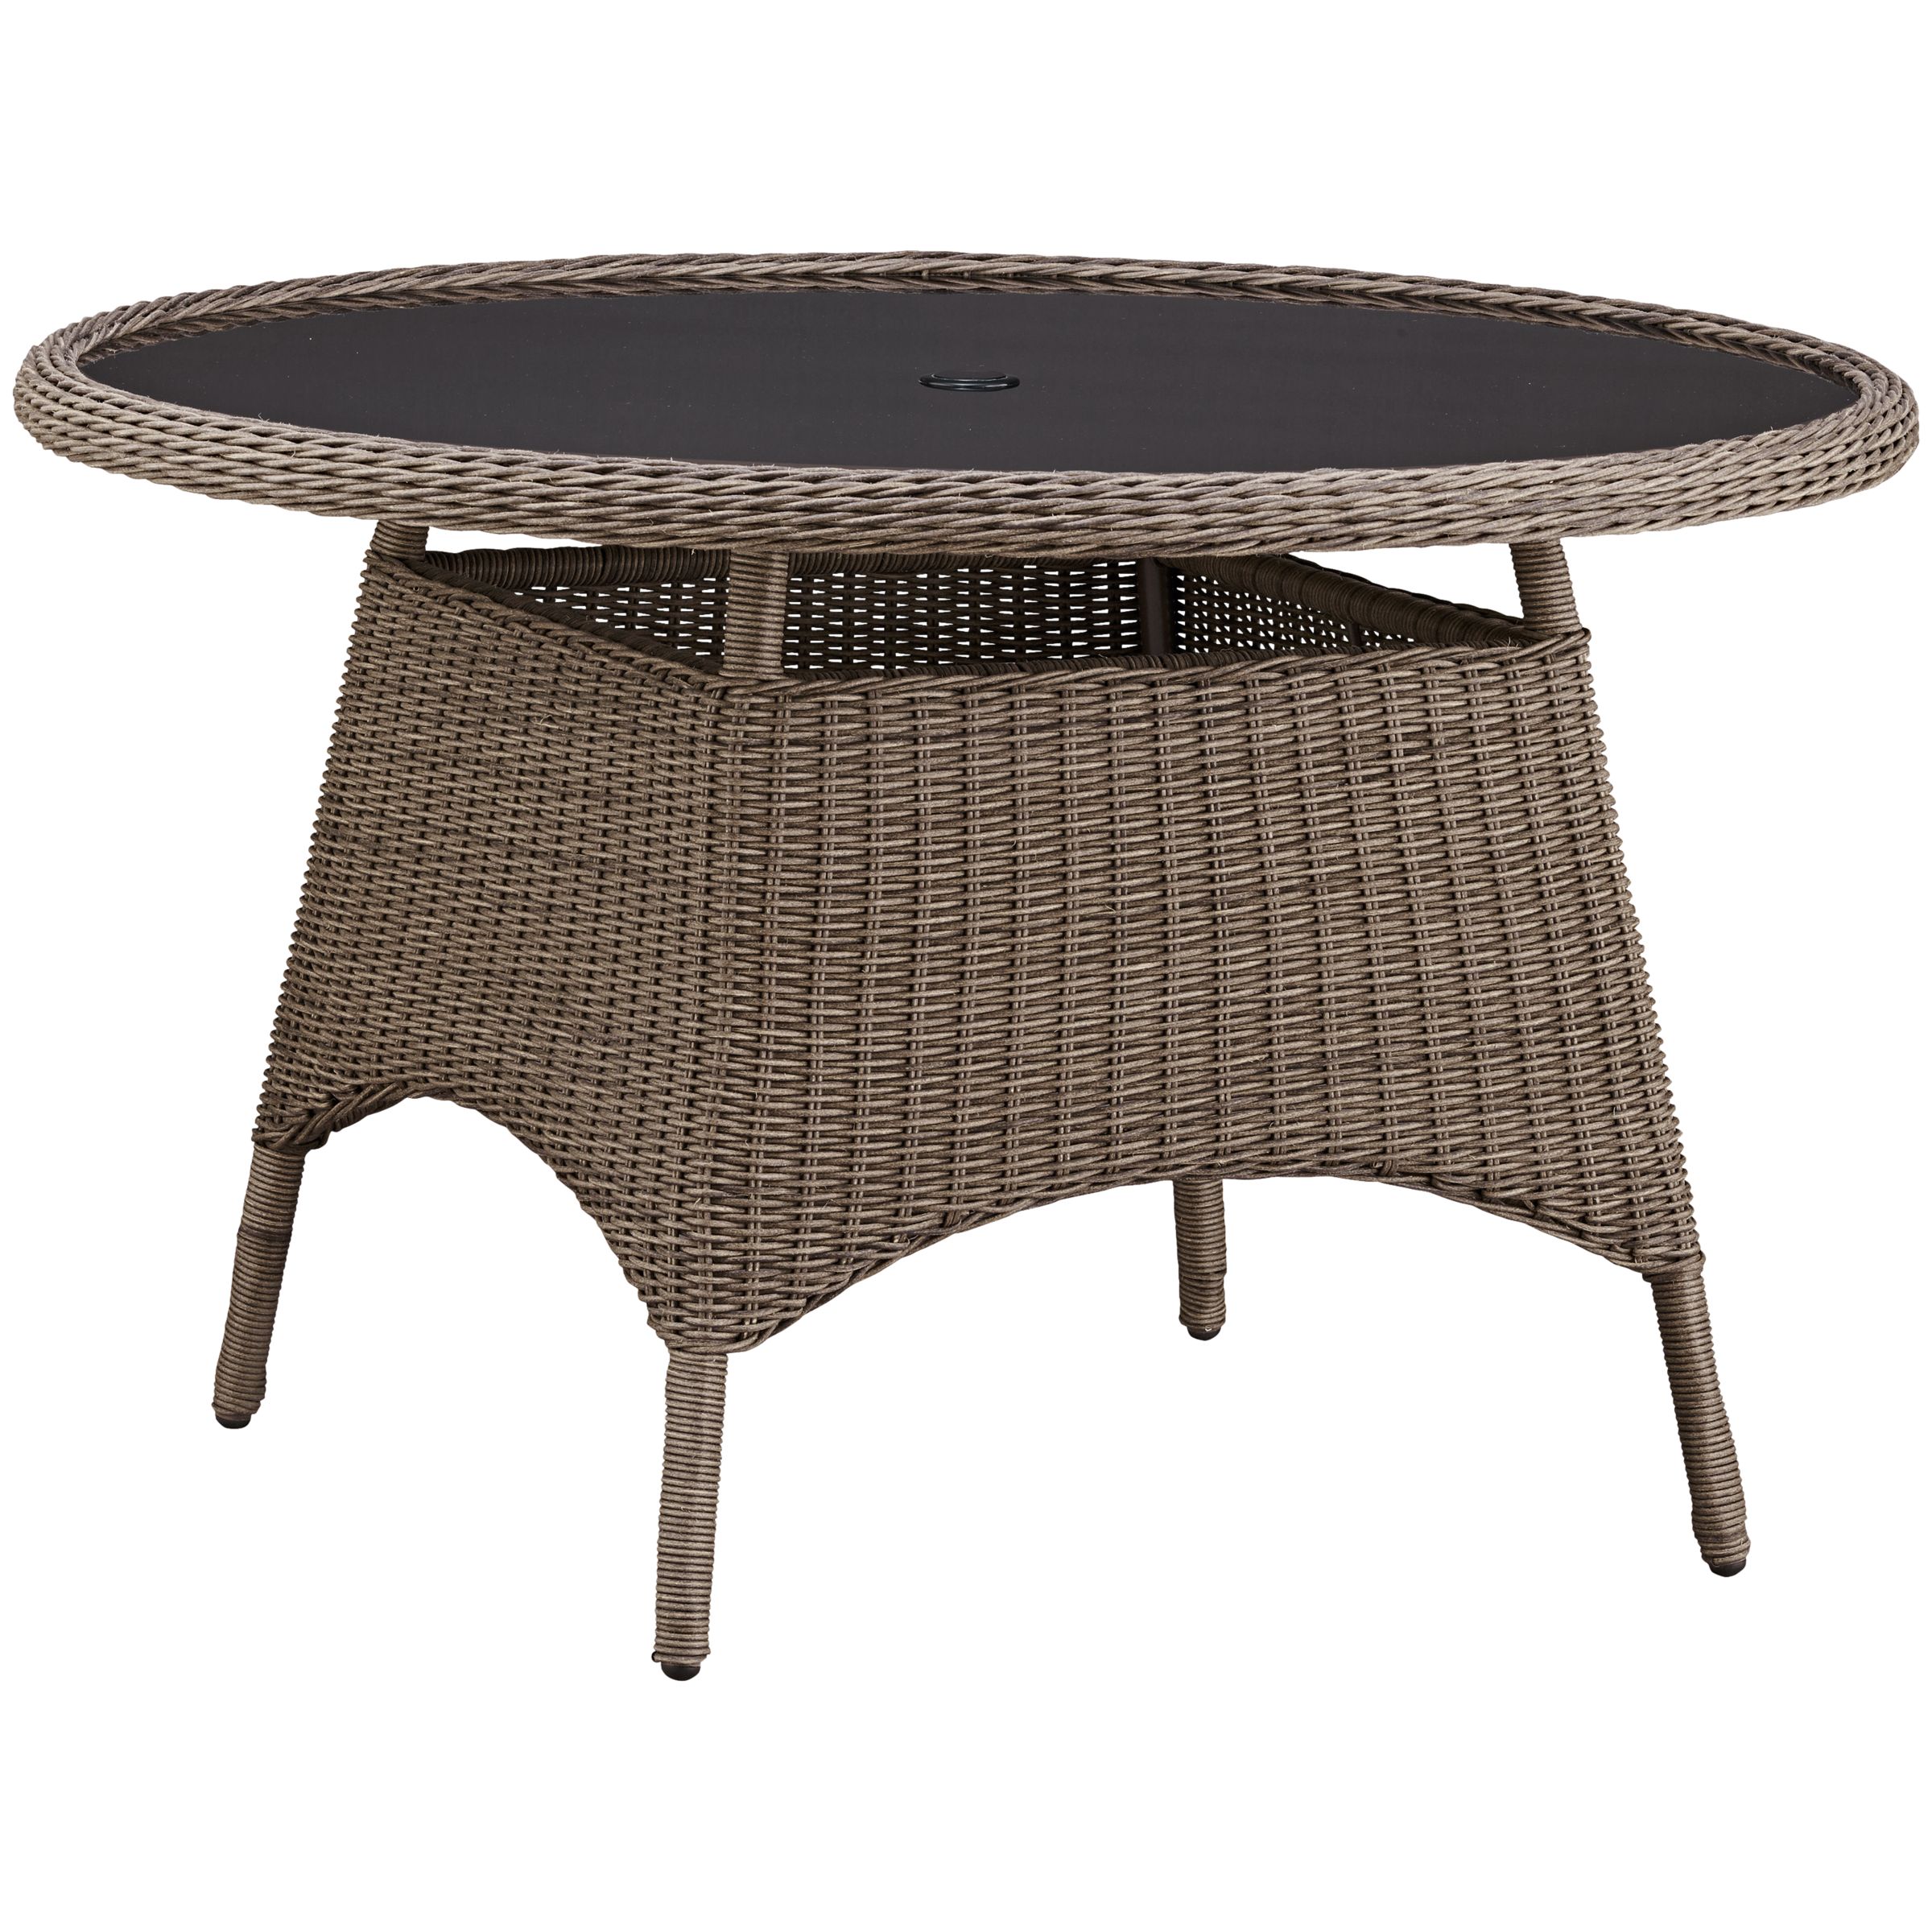 Kettler Round 4 Seater Outdoor Dining Table, Rattan, width 125cm